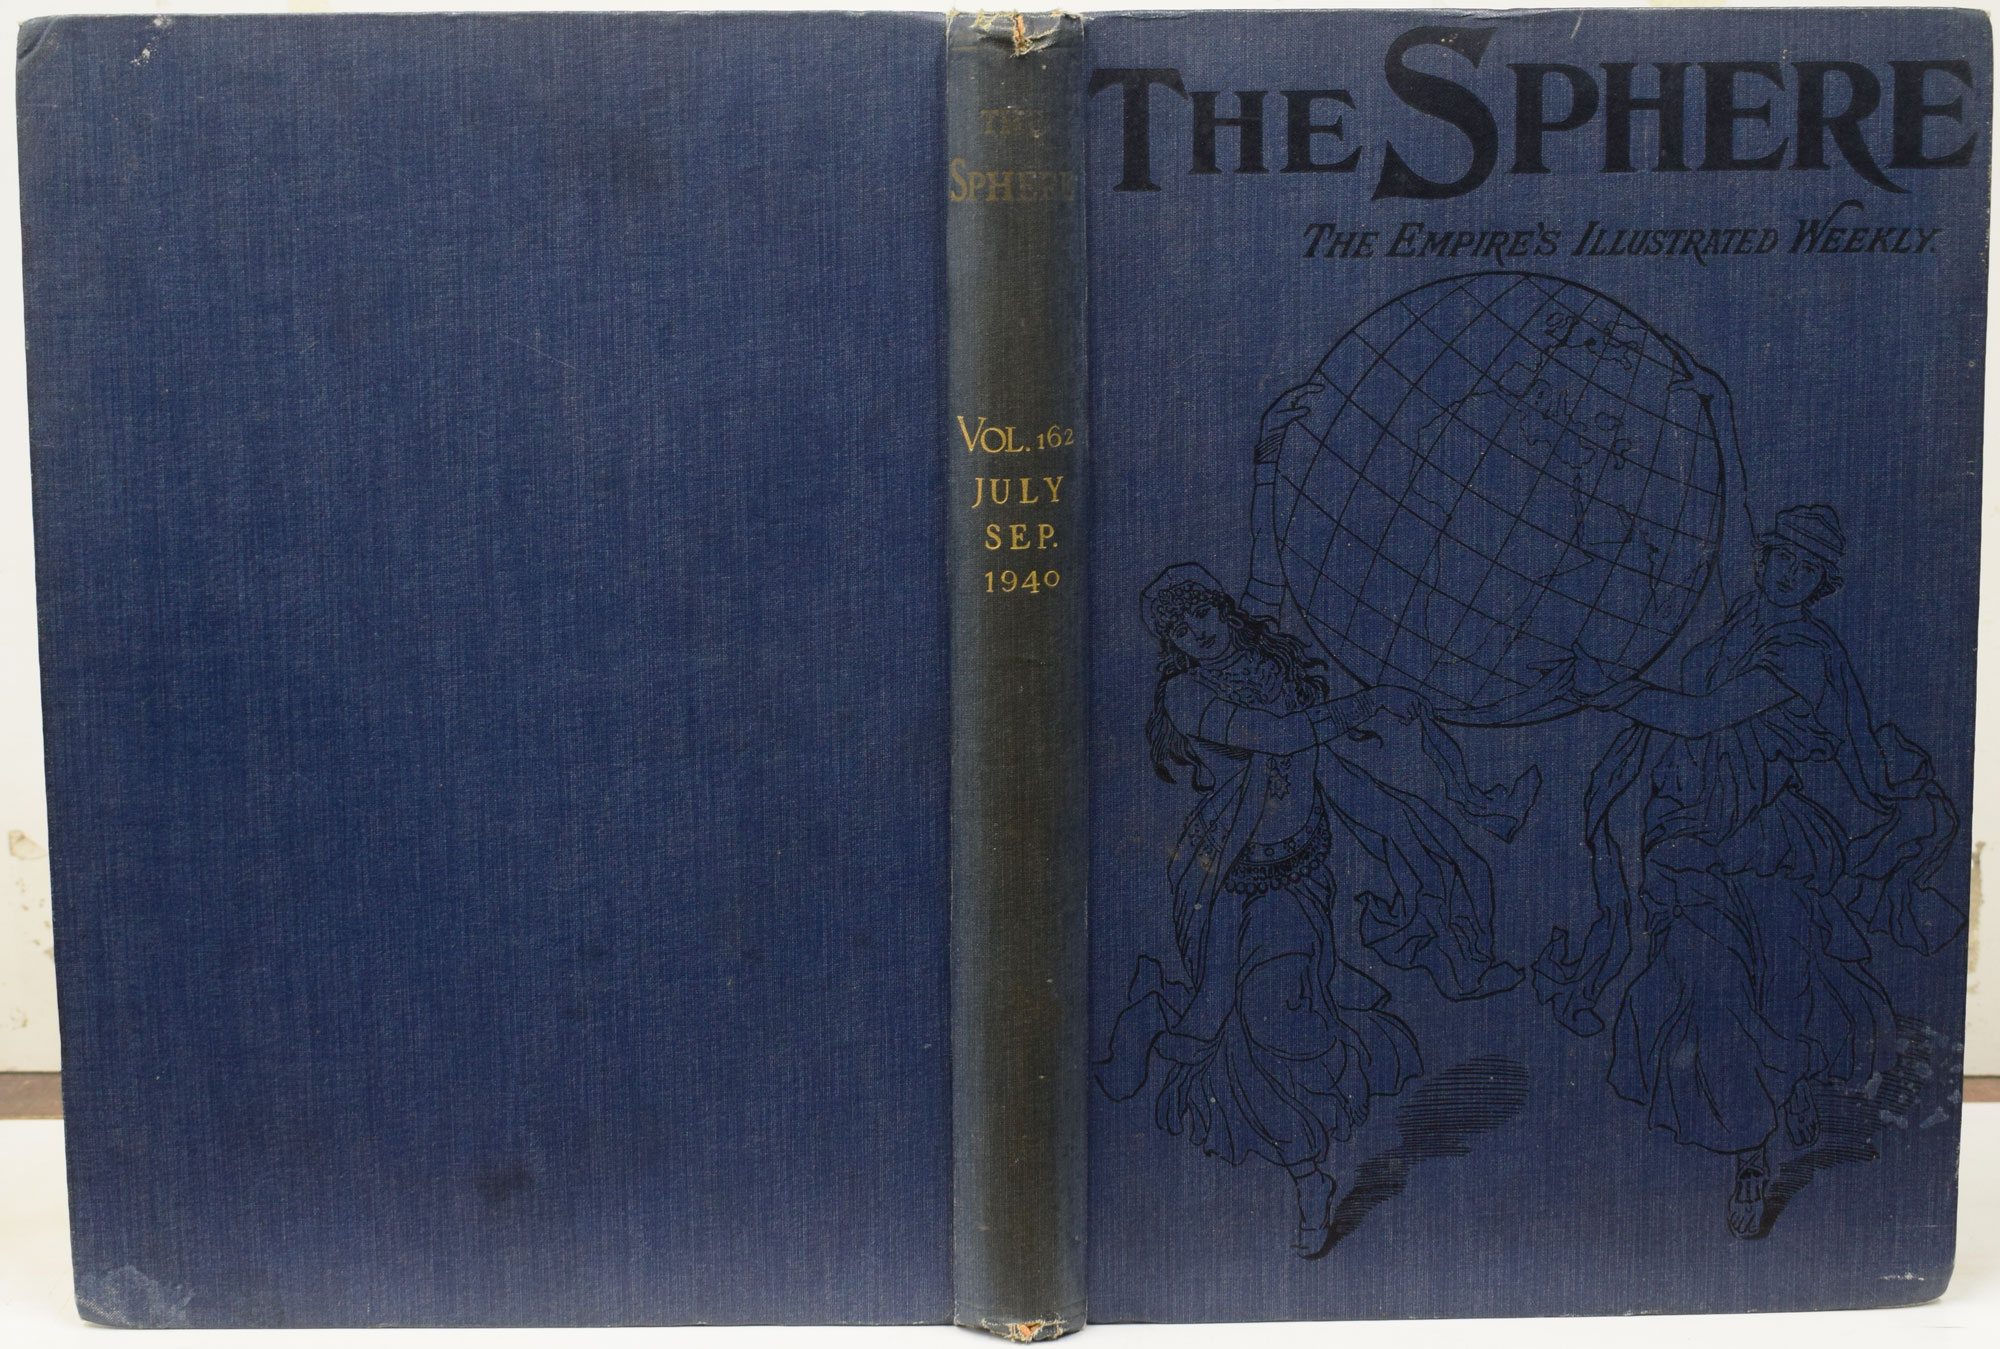 The Sphere. The Empire's Illustrated Weekly. Index to Volume CLXII (162). From July 6 to September 28, 1940.